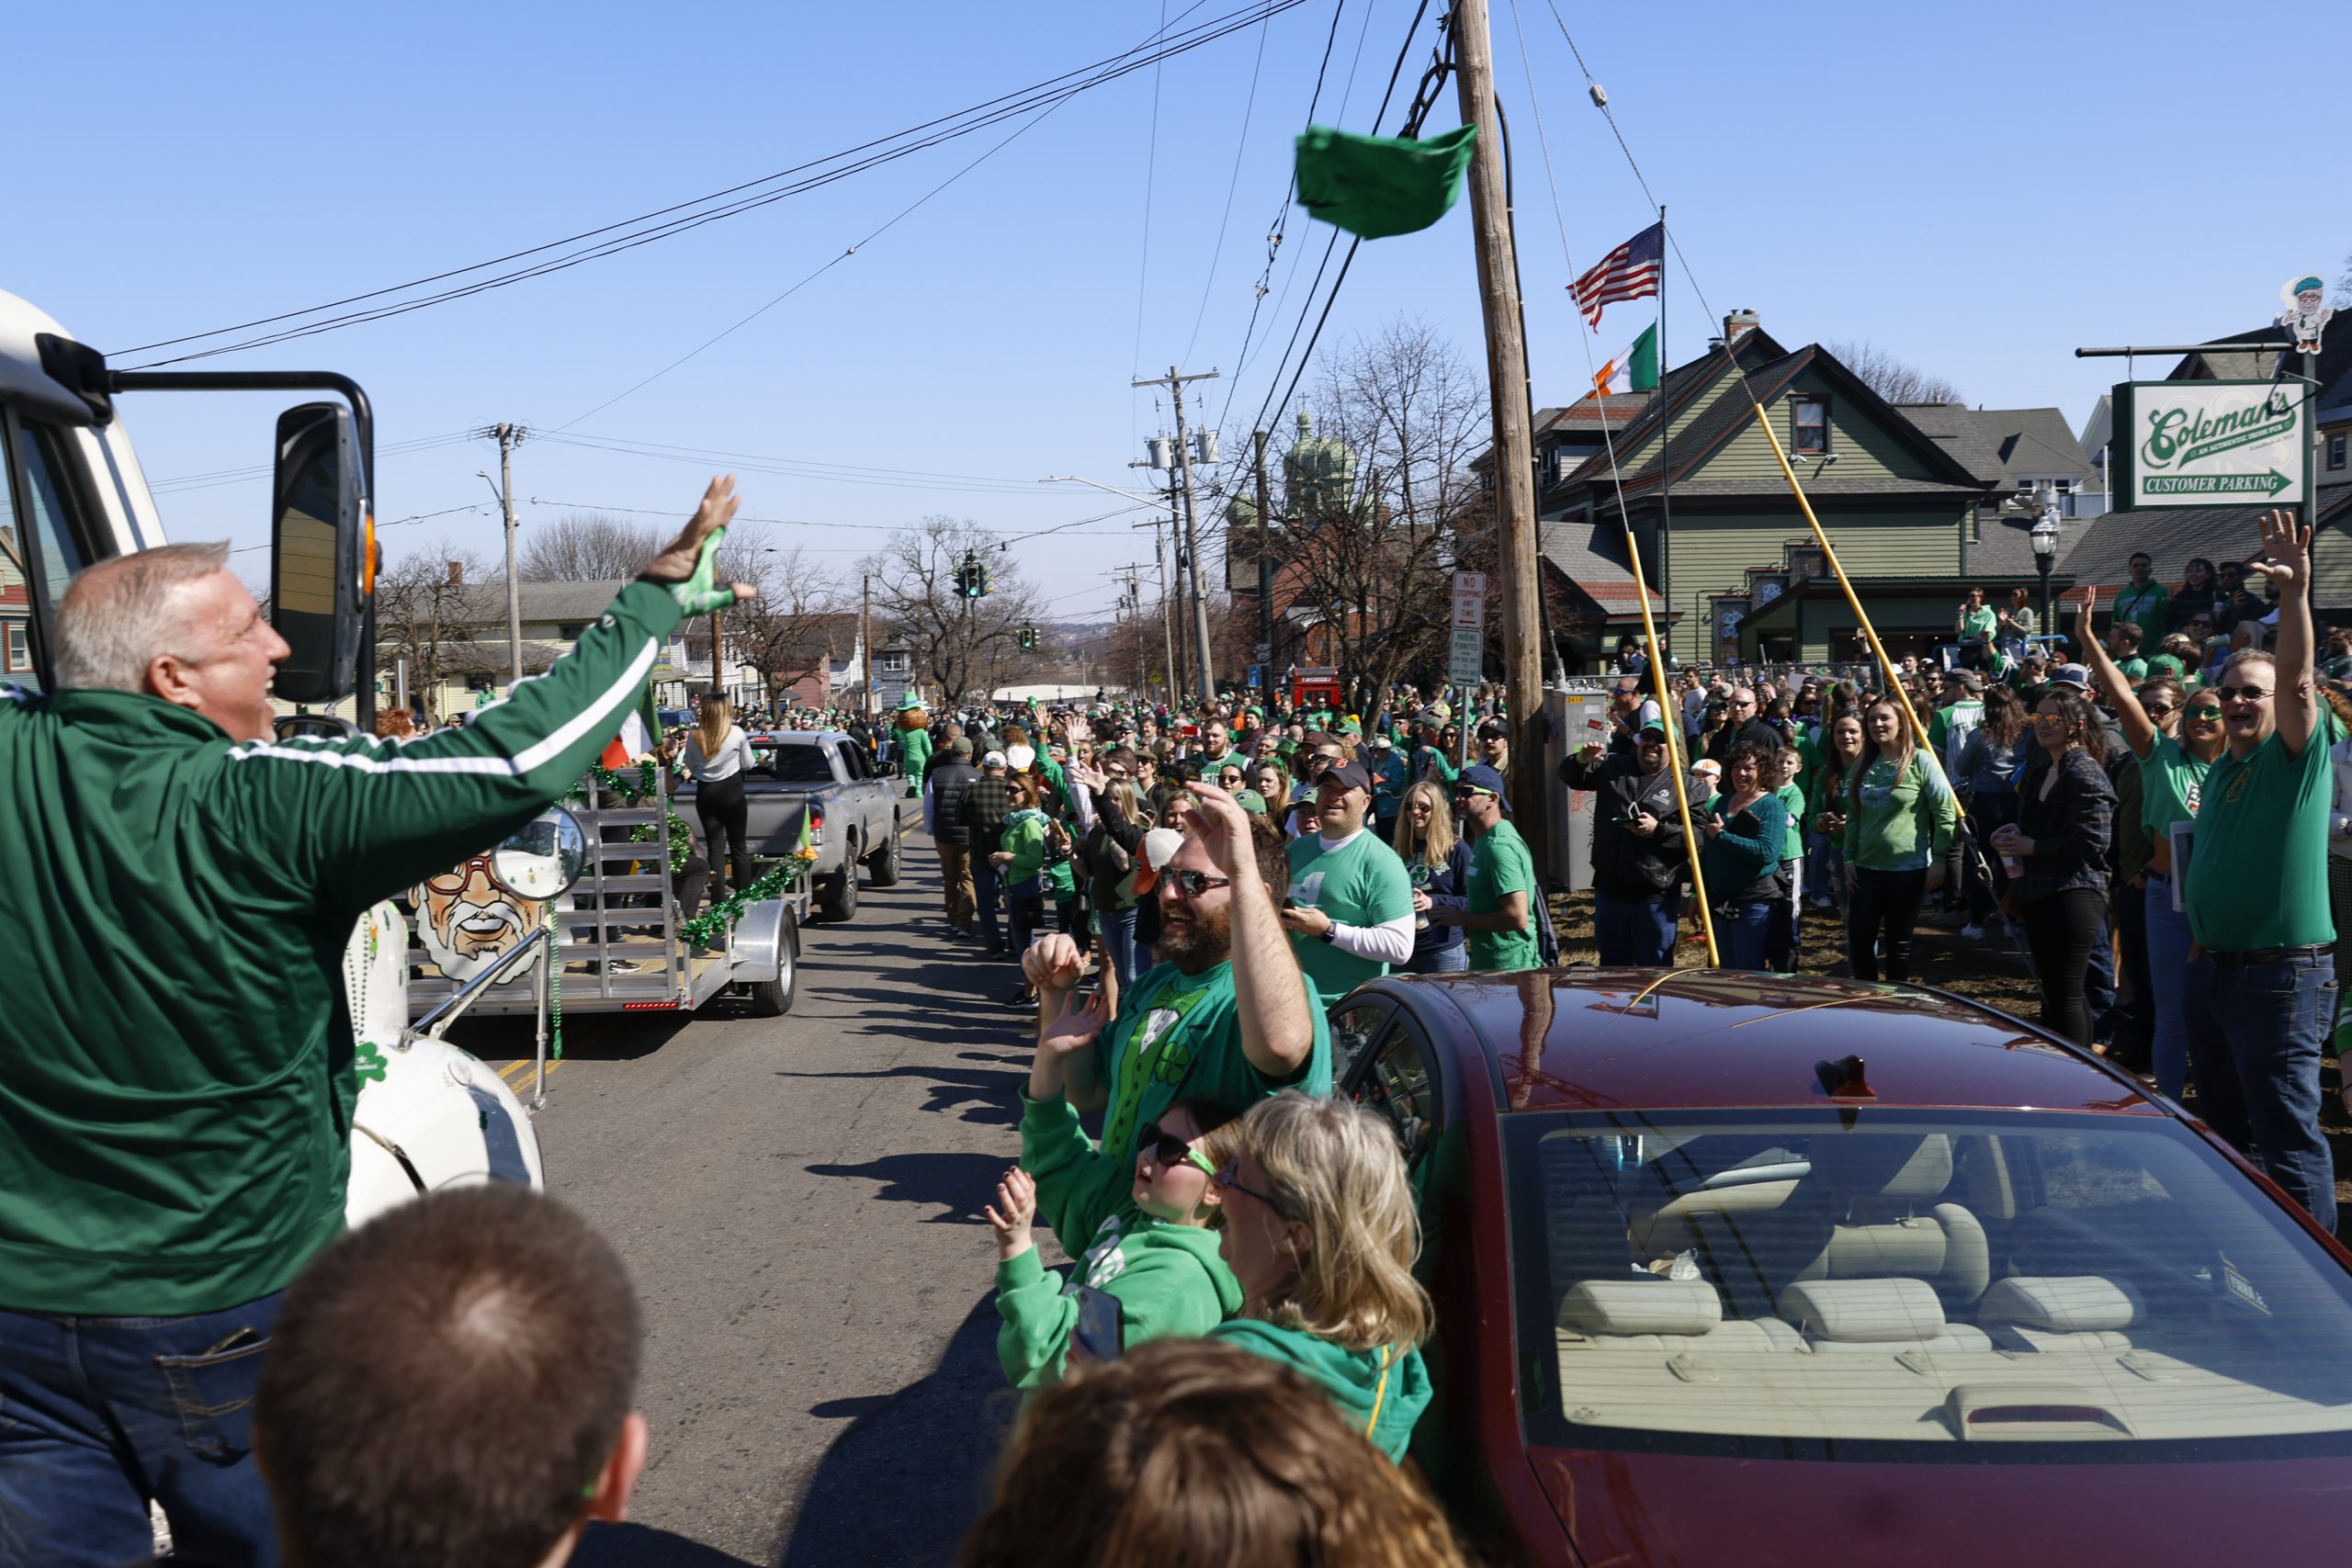 A man throws shirts and other memorabilia from the Coleman's green beer tanker to the crowd of people waiting for the festivities to begin.